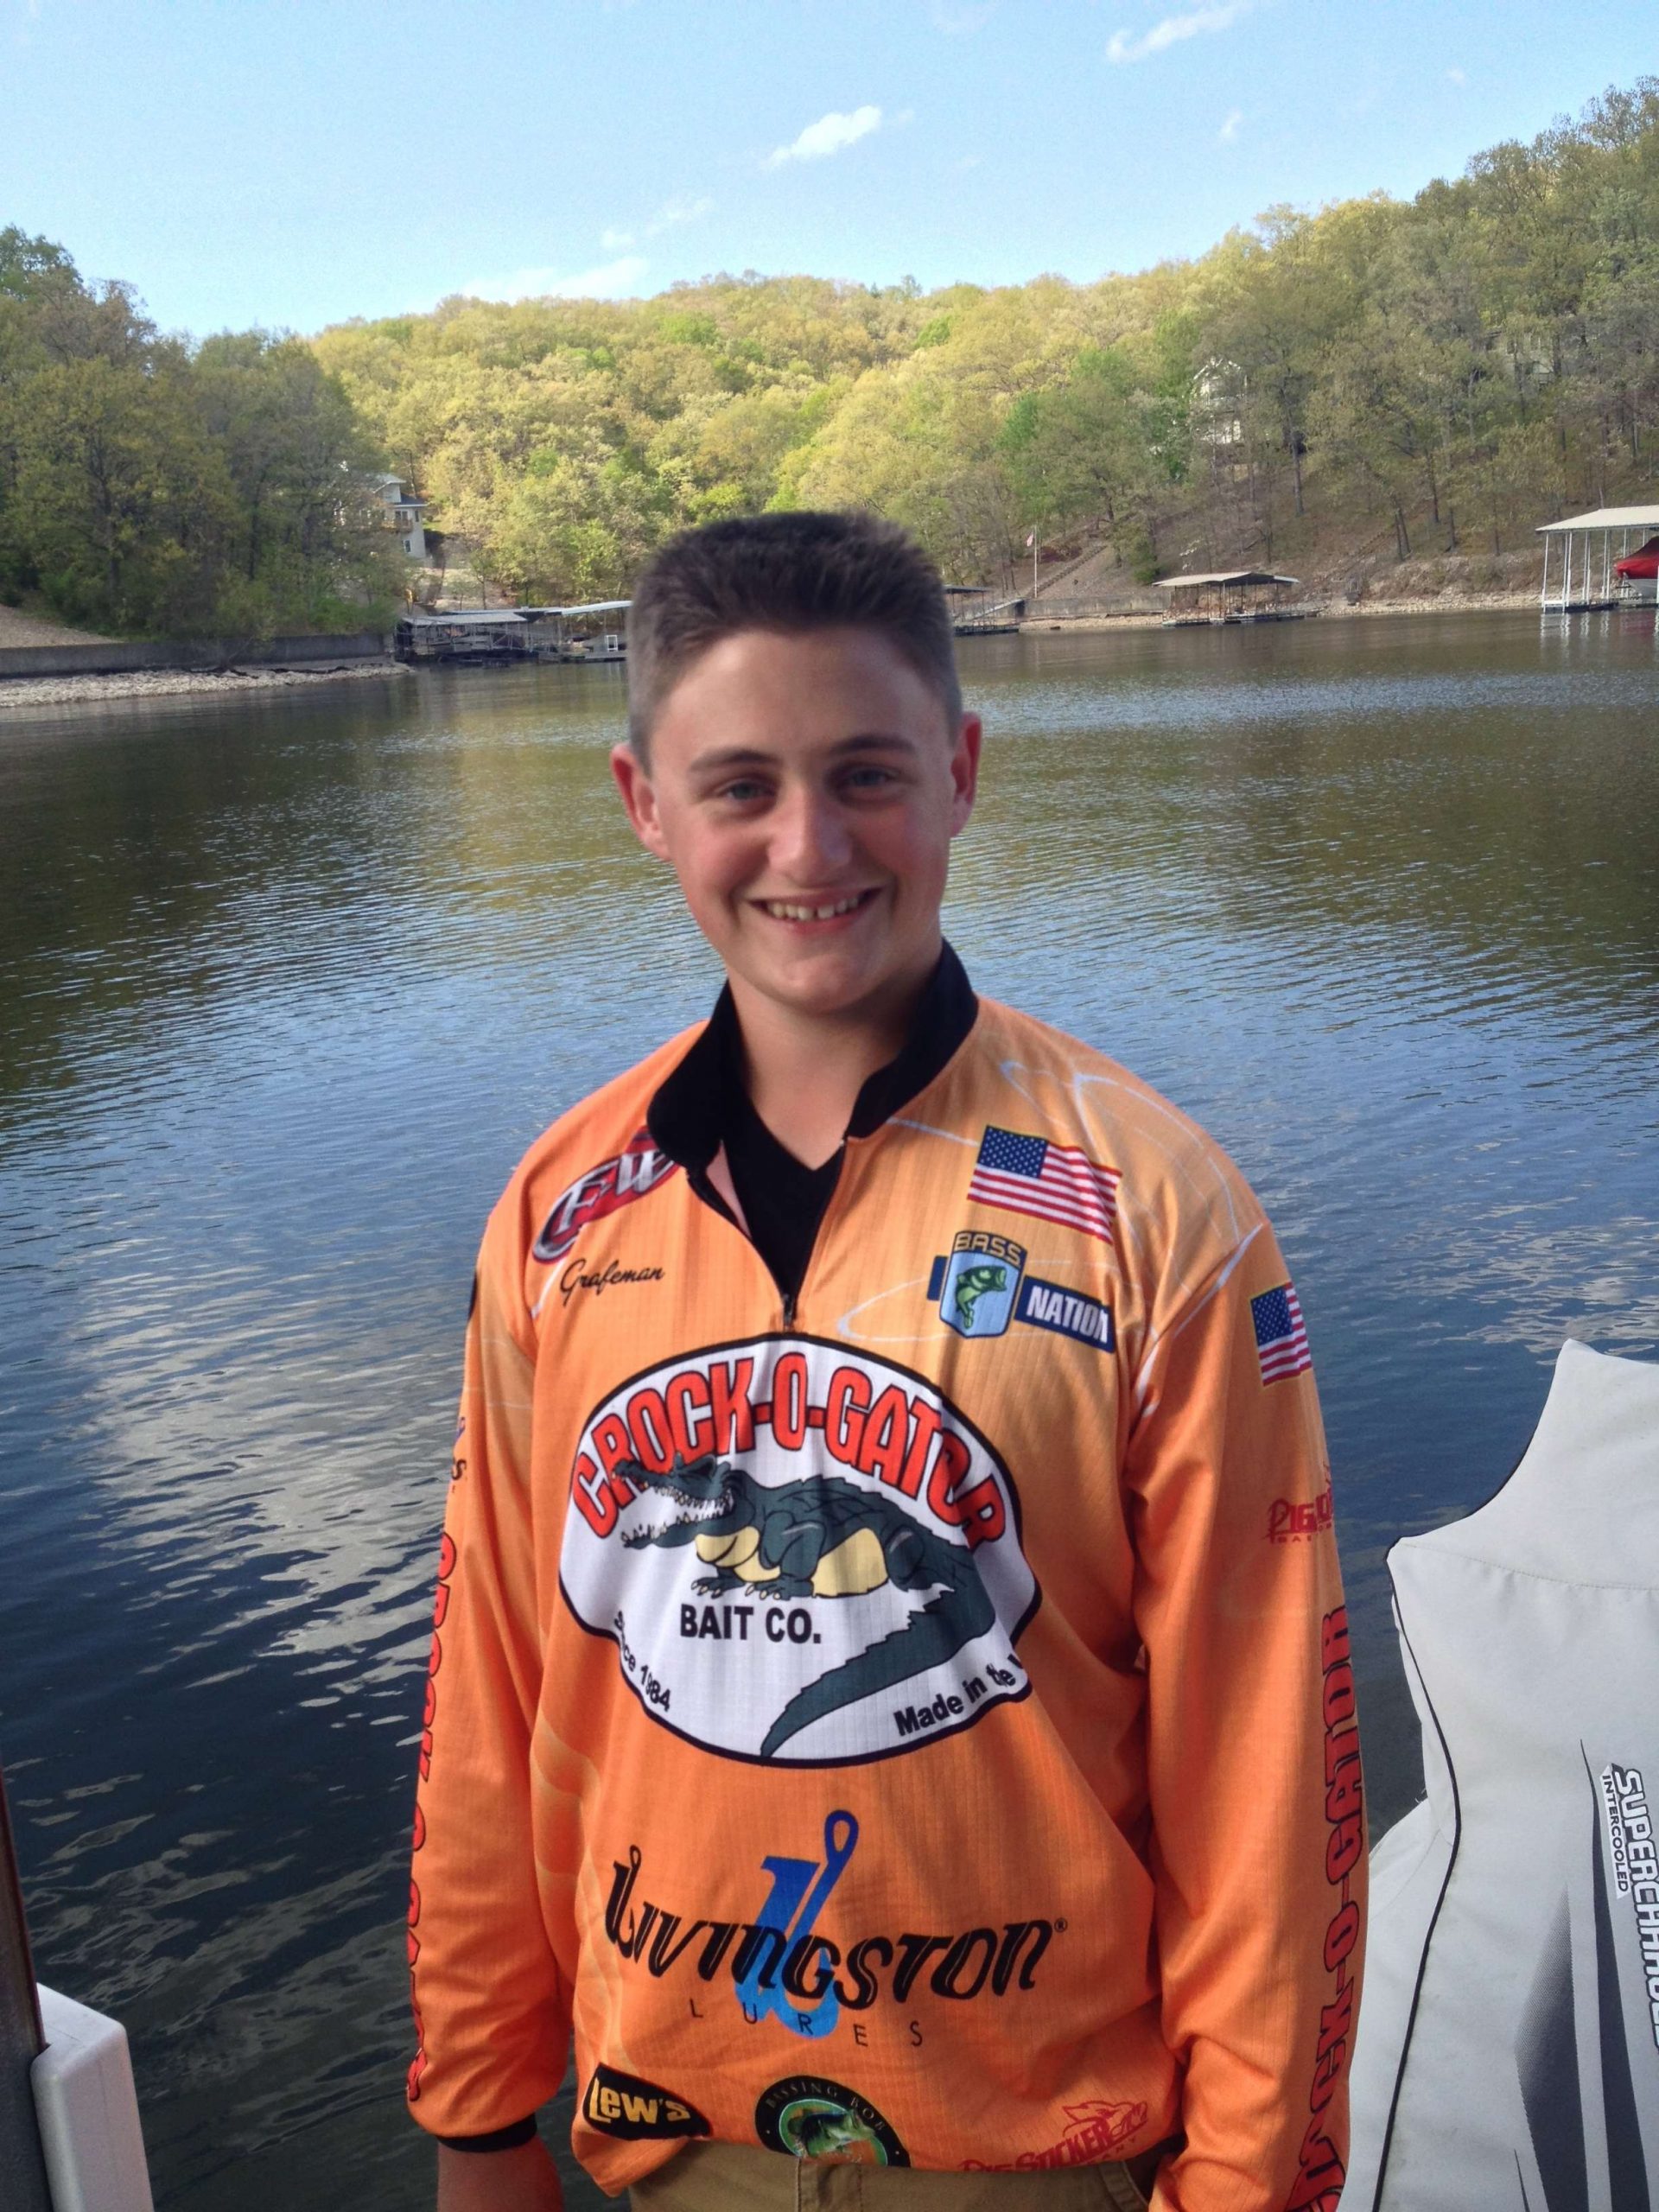 <p>Missouri: Joe Grafeman</p>
<p>
Grafeman is a sophomore at School of the Osage. Along with his partner, he won the Missouri state championship in fall and the Junior Bassmaster Classic in spring 2014. Grafeman volunteers to work fishing shows and to speak to elementary school kids about getting good grades and pursuing their dreams.